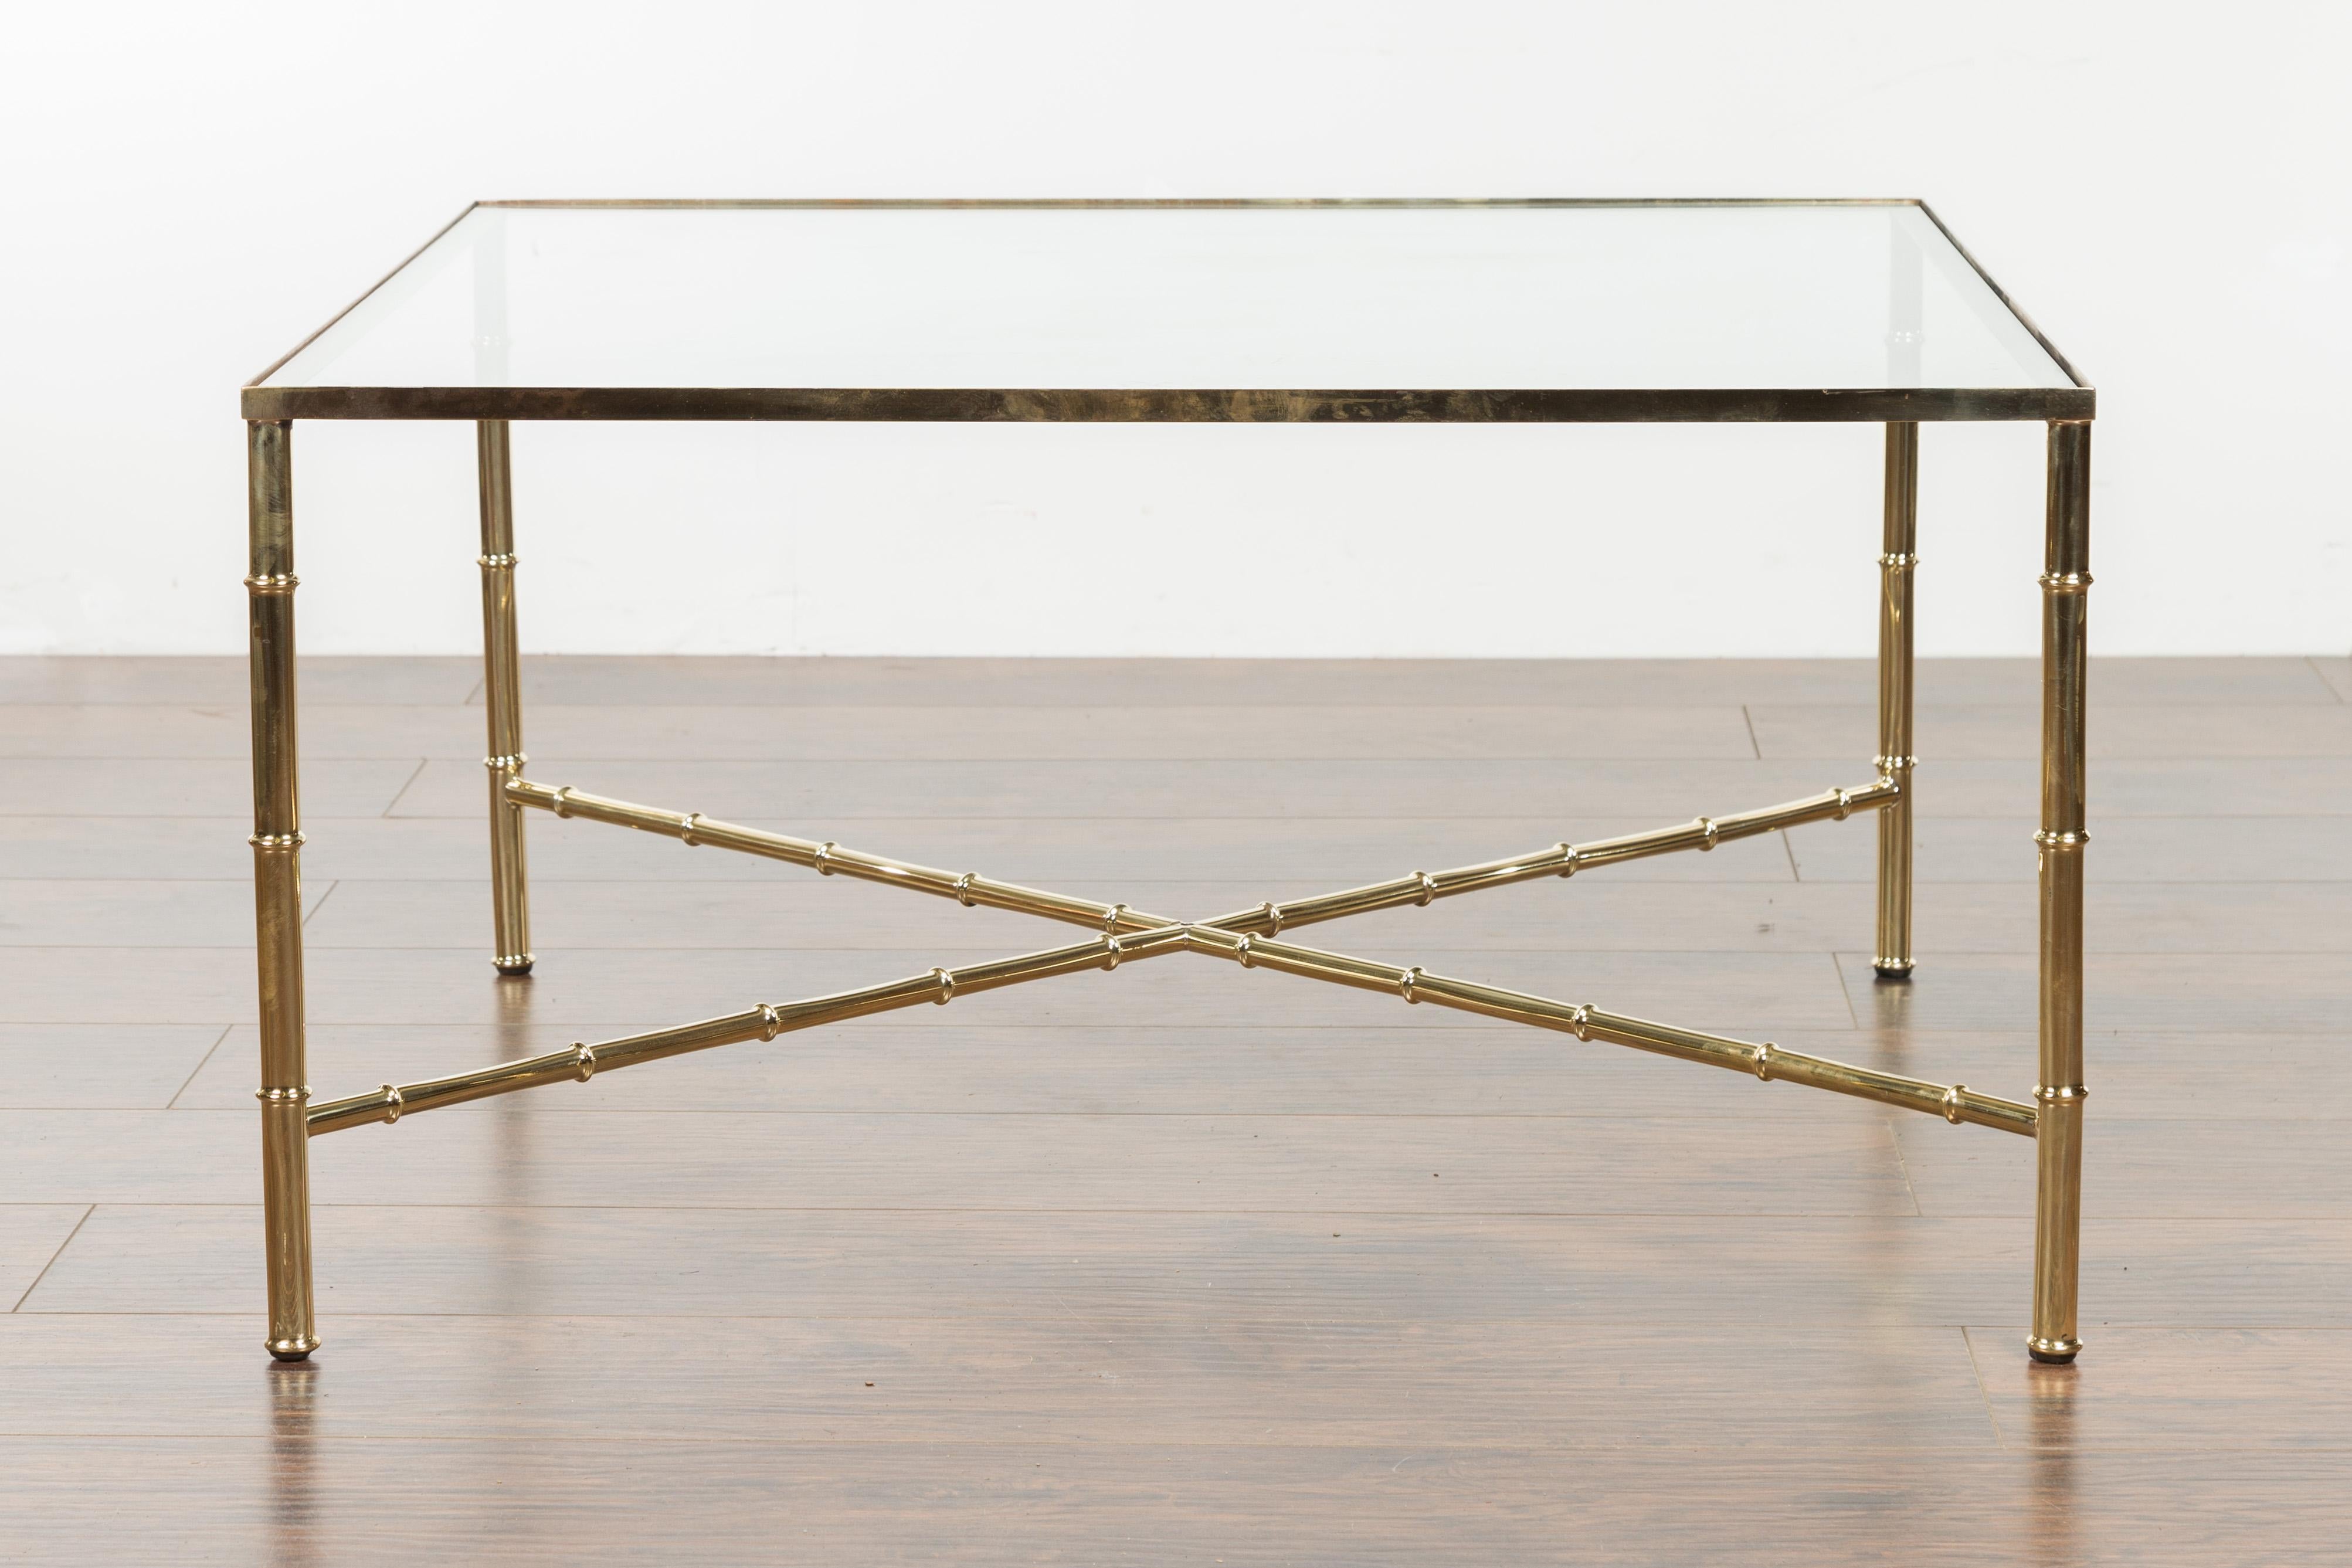 An Italian vintage brass coffee table from the mid-20th century, with glass top. Created in Italy during the midcentury period, this coffee table features a square glass top supported by four straight brass legs connected to one another through an